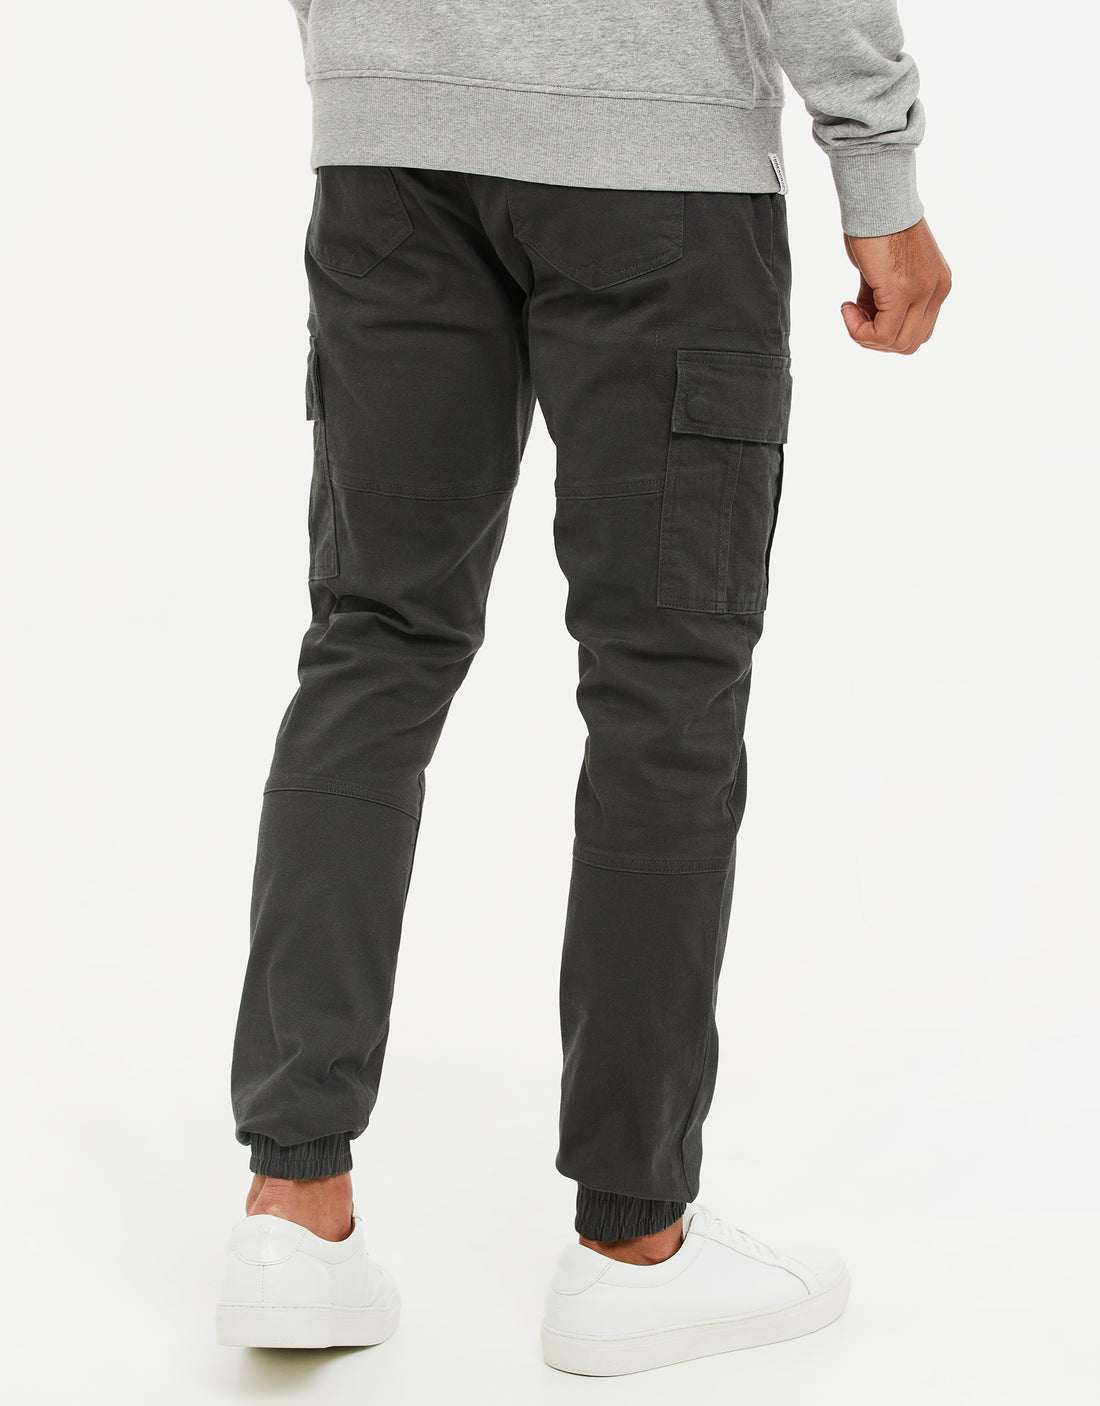 Khaki Cargo Pant With Cuffed Hem | The Couture Club